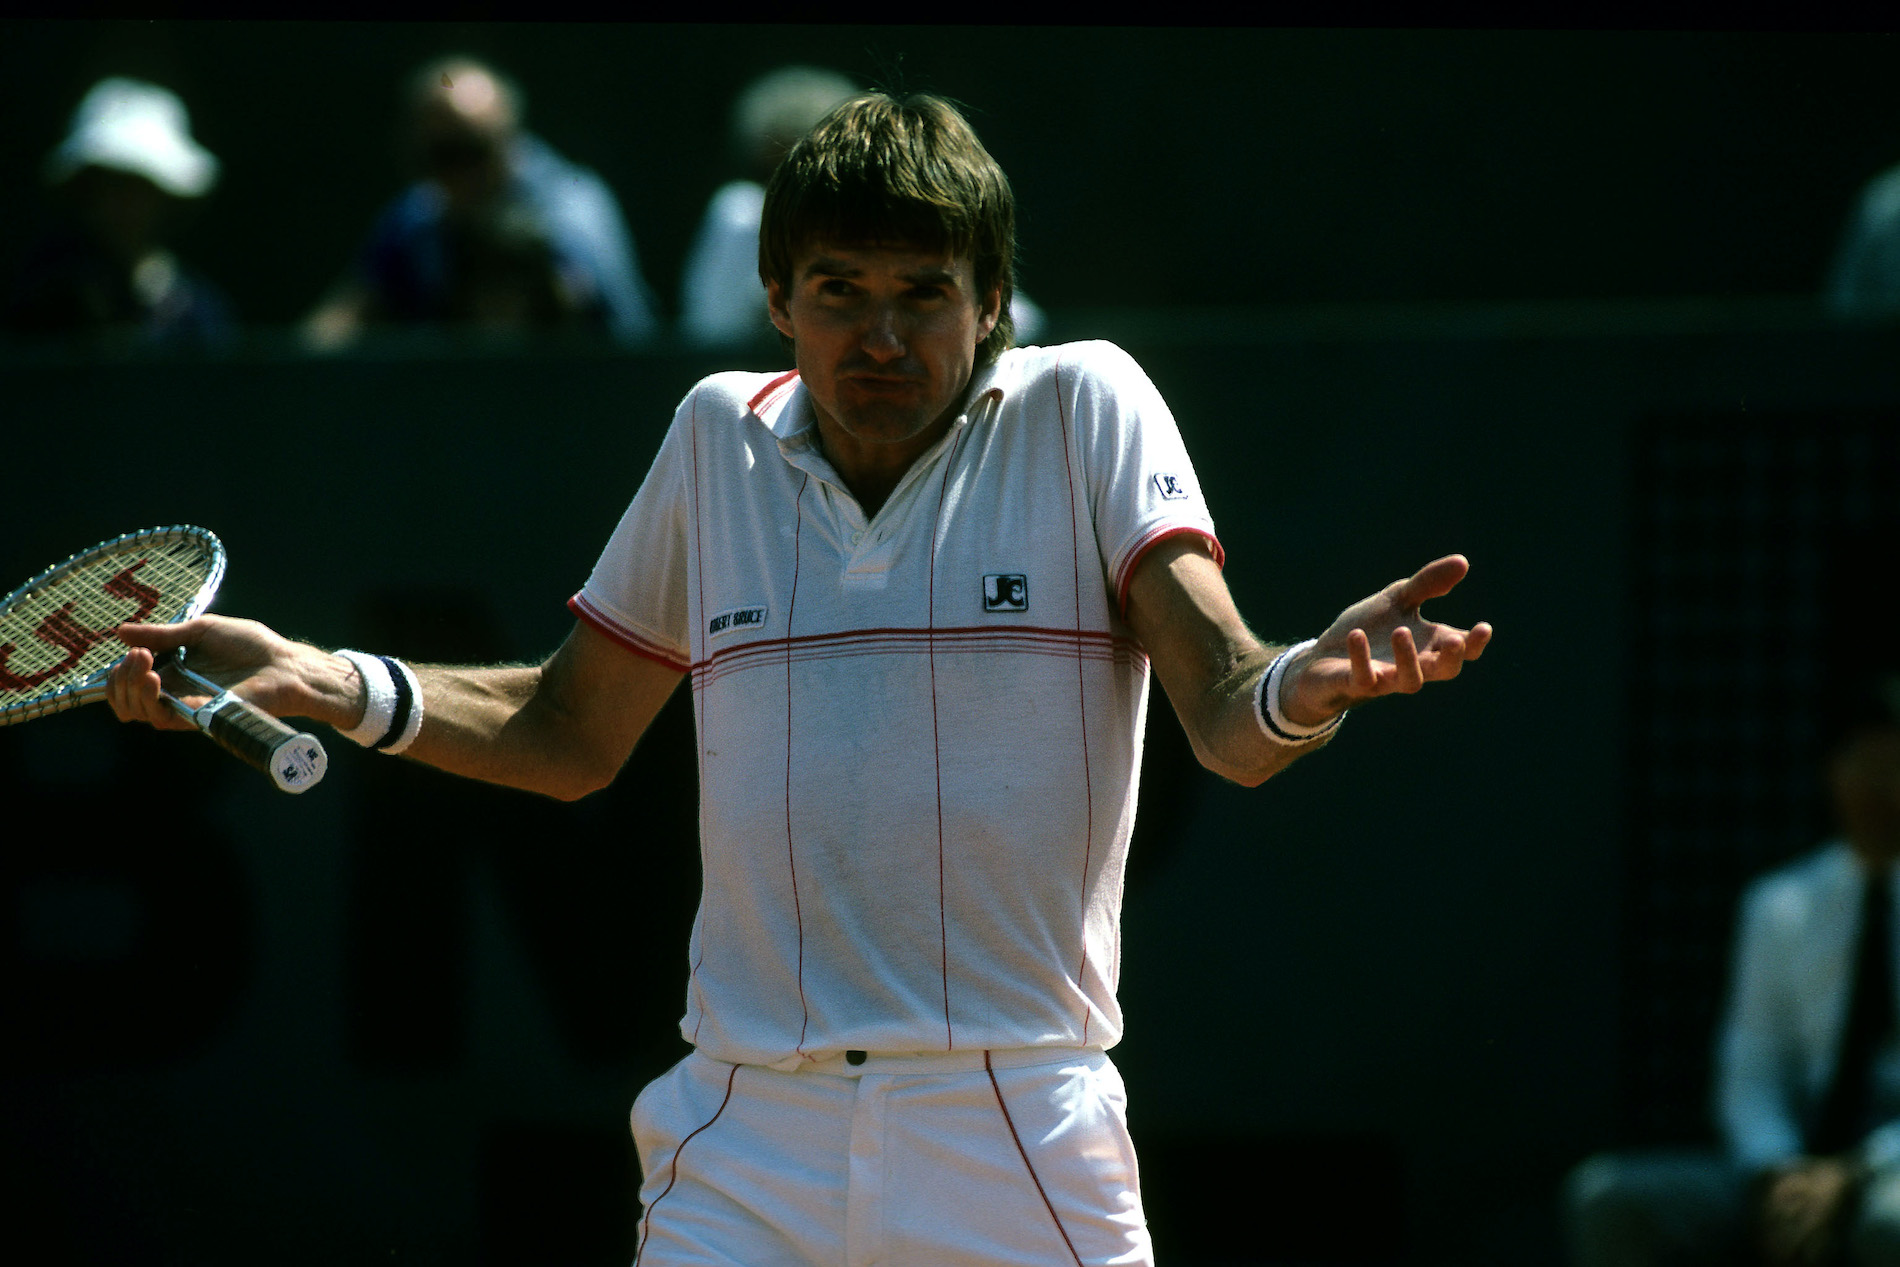 Jimmy Connors - Wilson T2000